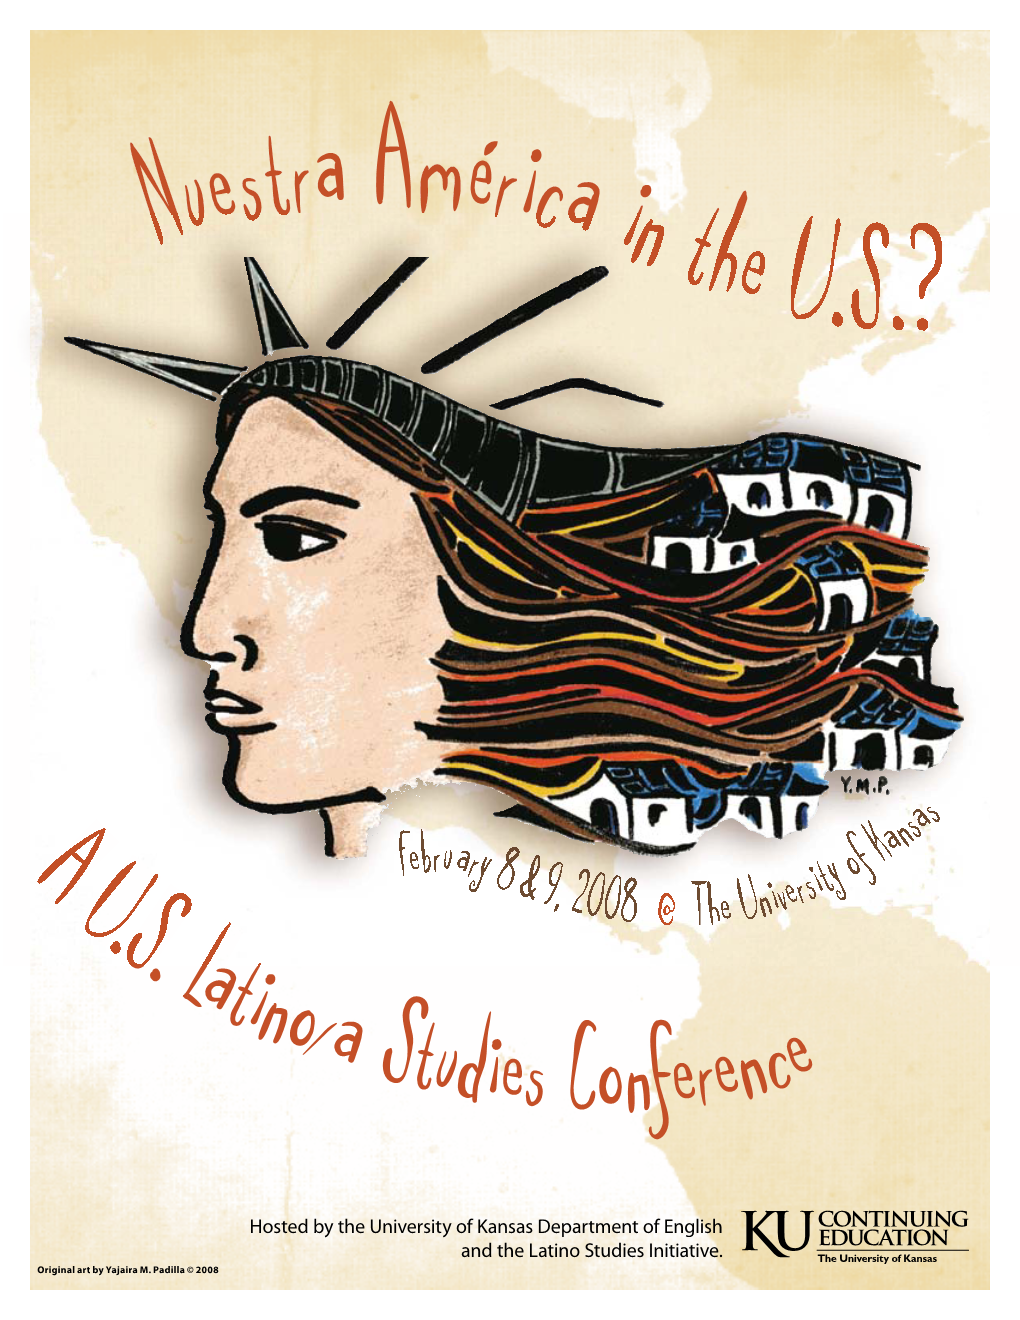 Hosted by the University of Kansas Department of English and the Latino Studies Initiative